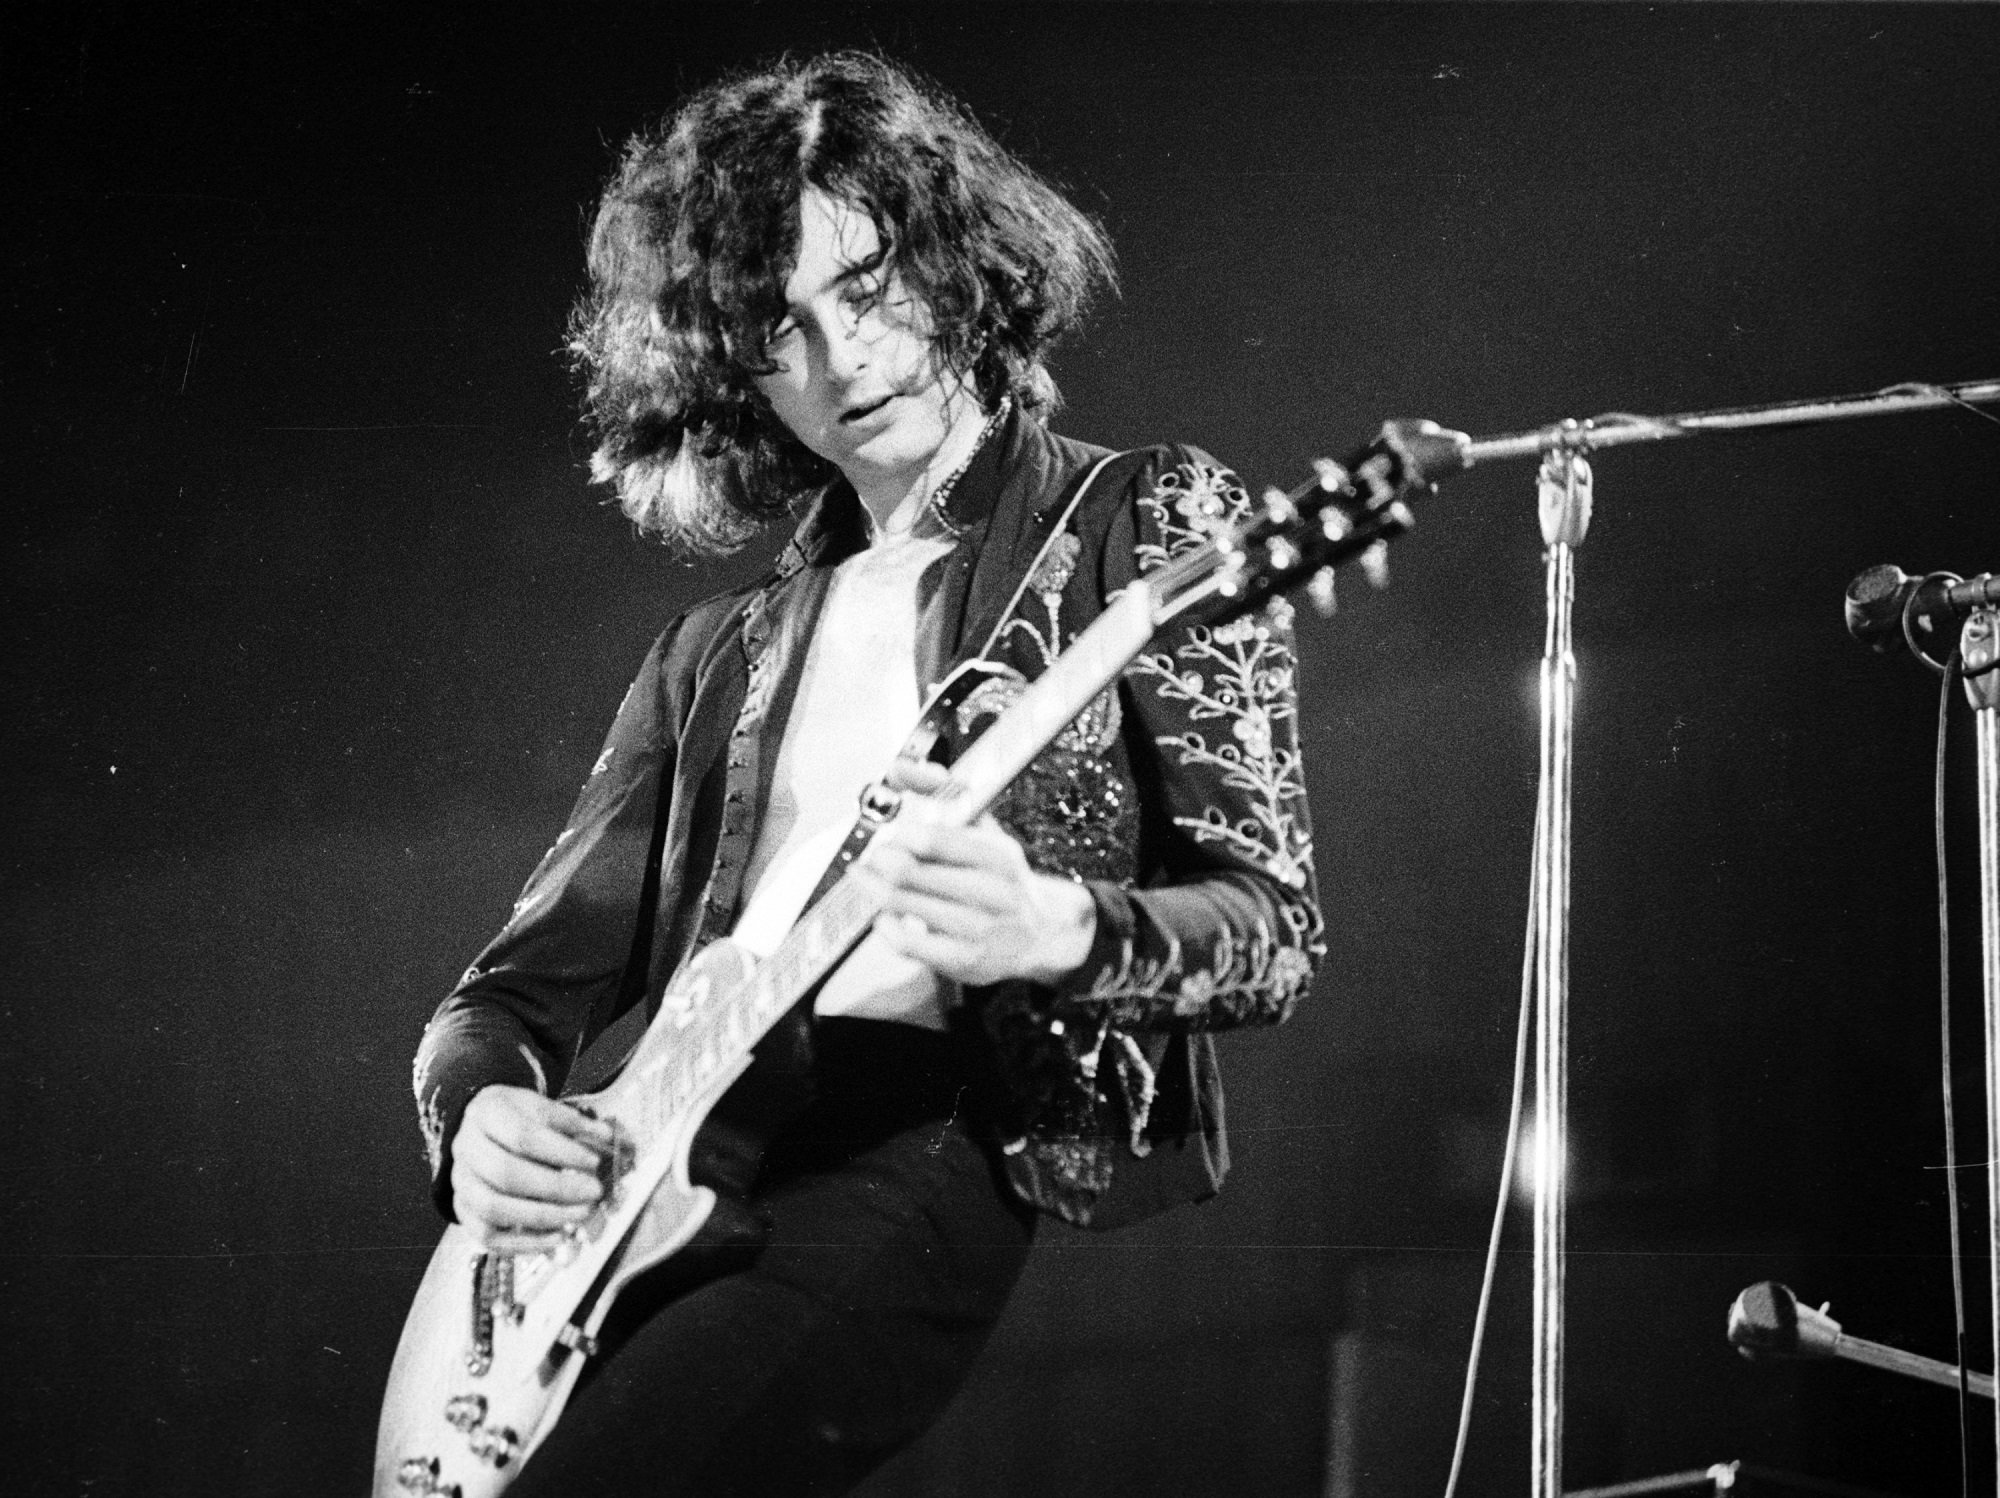 A black-and-white photo of Jimmy Page playing the guitar